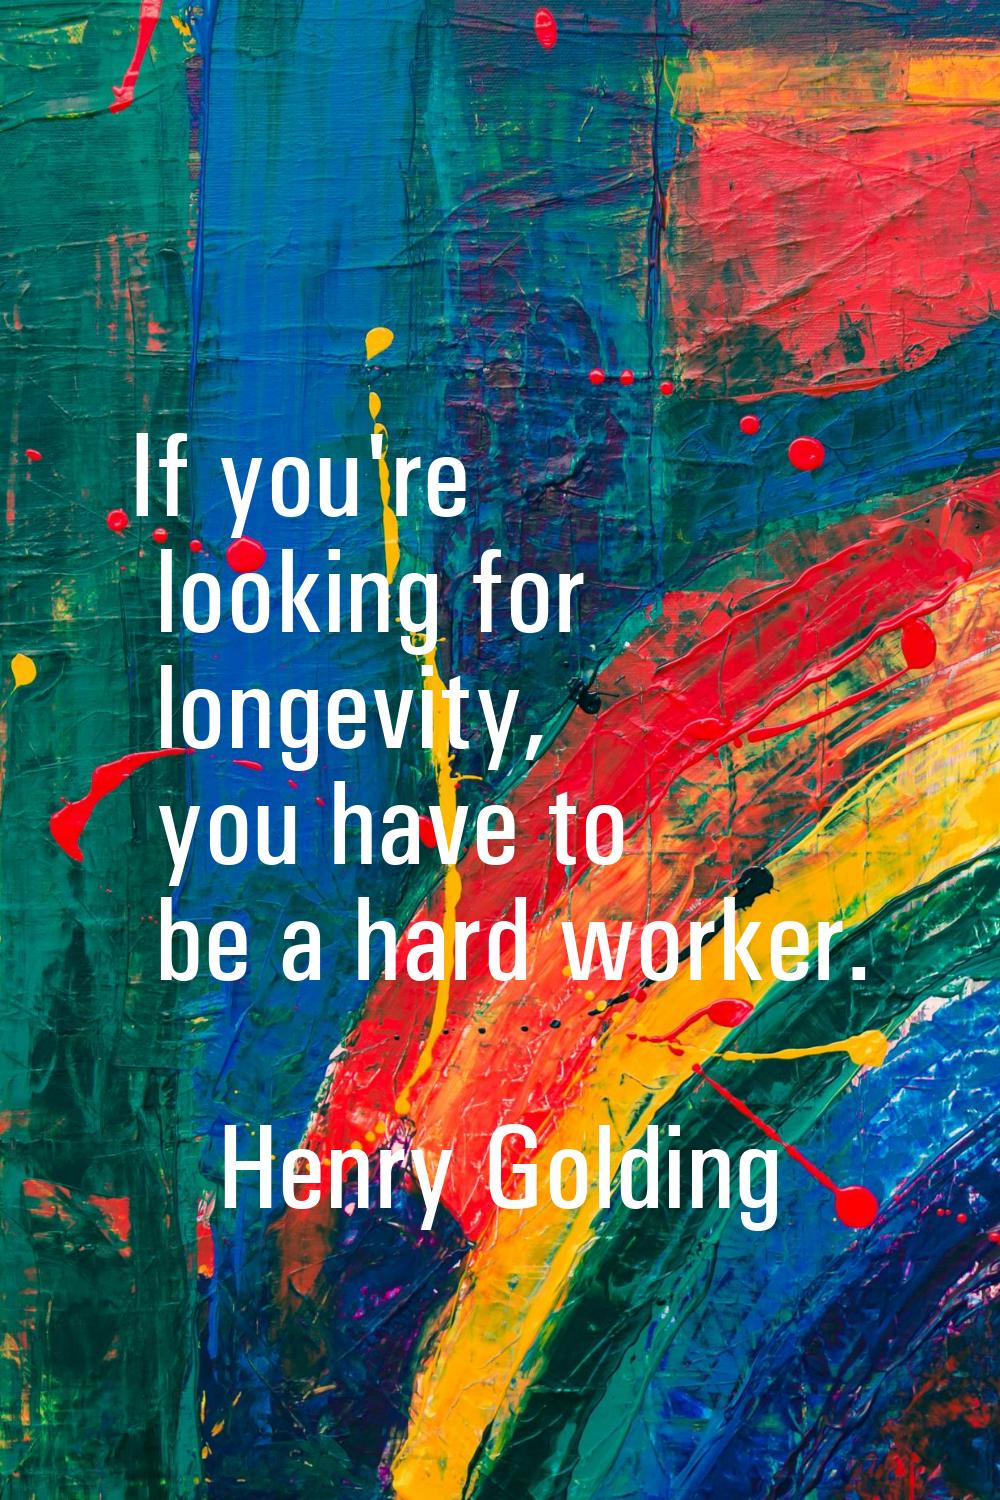 If you're looking for longevity, you have to be a hard worker.